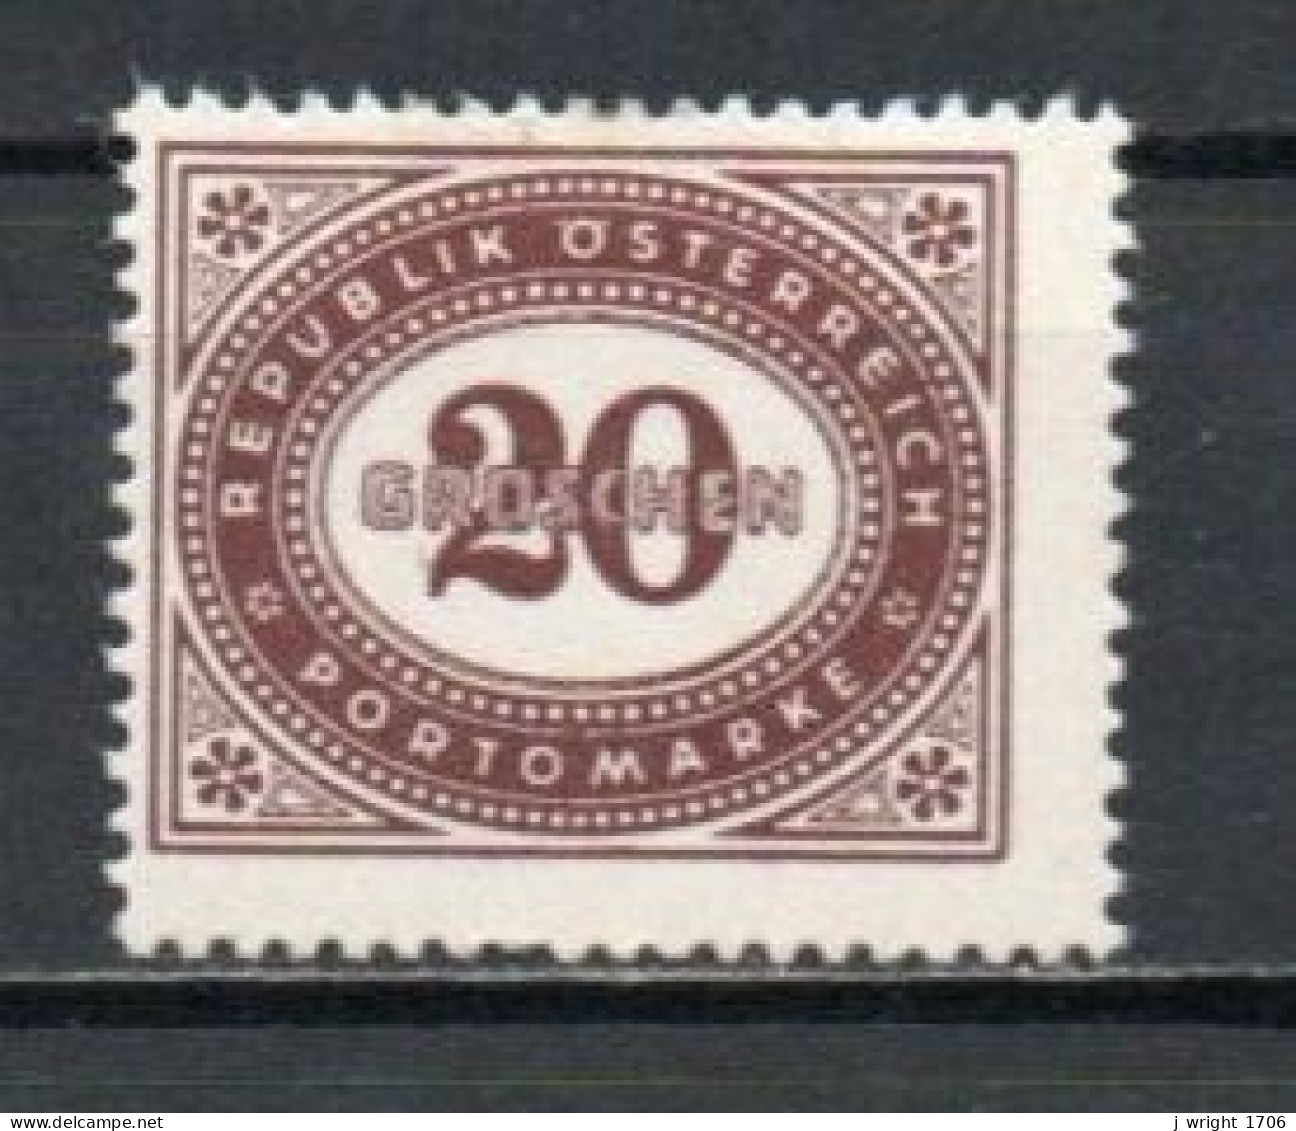 Austria, 1947, Numeral In Oval Frame, 20g, MH - Postage Due